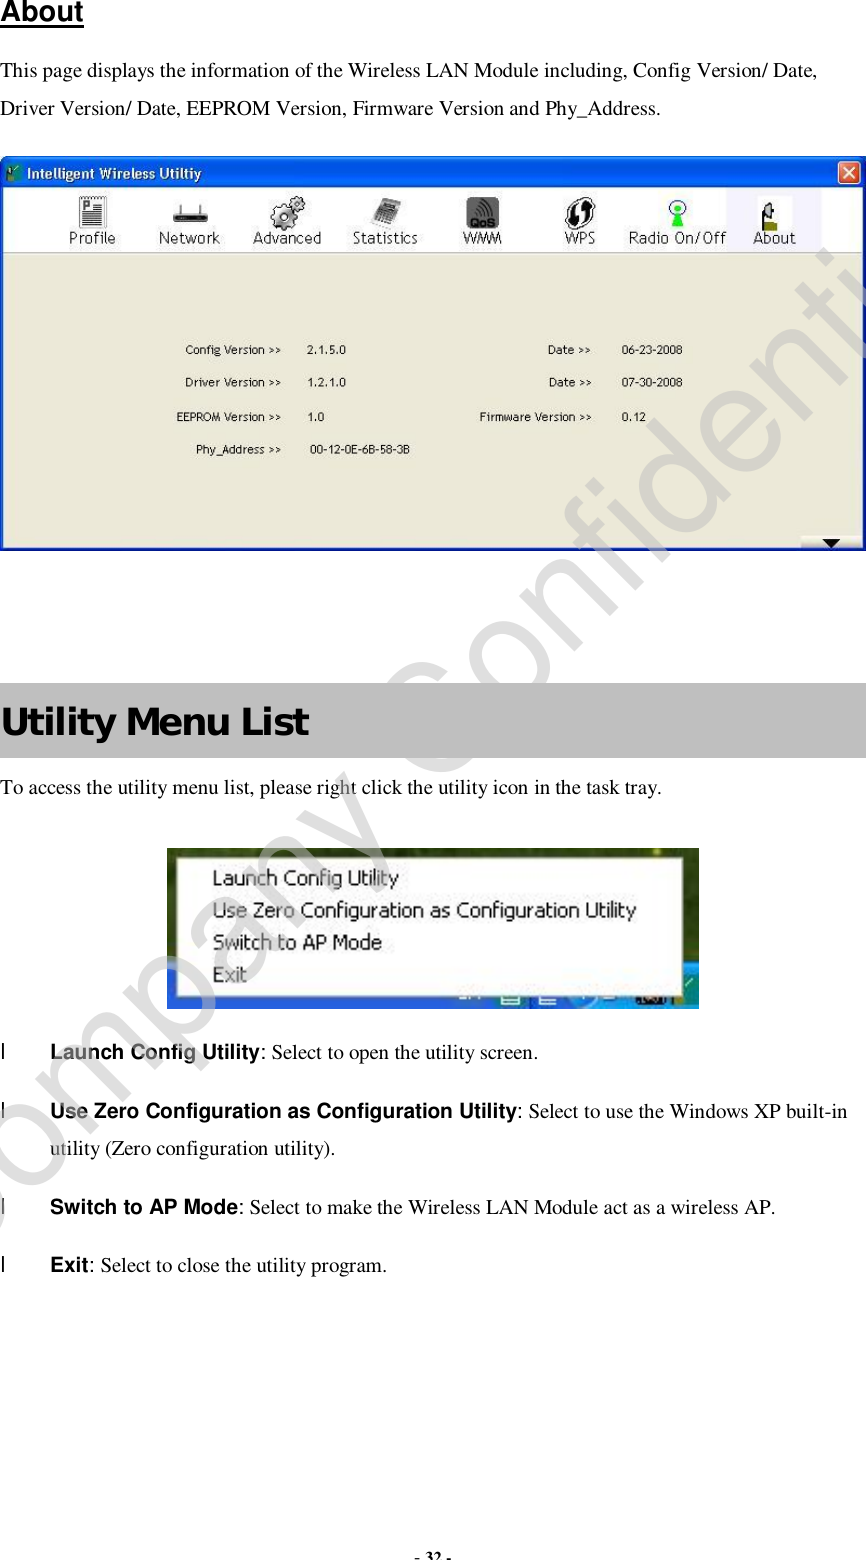  - 32 - About This page displays the information of the Wireless LAN Module including, Config Version/ Date, Driver Version/ Date, EEPROM Version, Firmware Version and Phy_Address.     Utility Menu List To access the utility menu list, please right click the utility icon in the task tray.  l Launch Config Utility: Select to open the utility screen. l Use Zero Configuration as Configuration Utility: Select to use the Windows XP built-in utility (Zero configuration utility). l Switch to AP Mode: Select to make the Wireless LAN Module act as a wireless AP. l Exit: Select to close the utility program.   Company Confidential